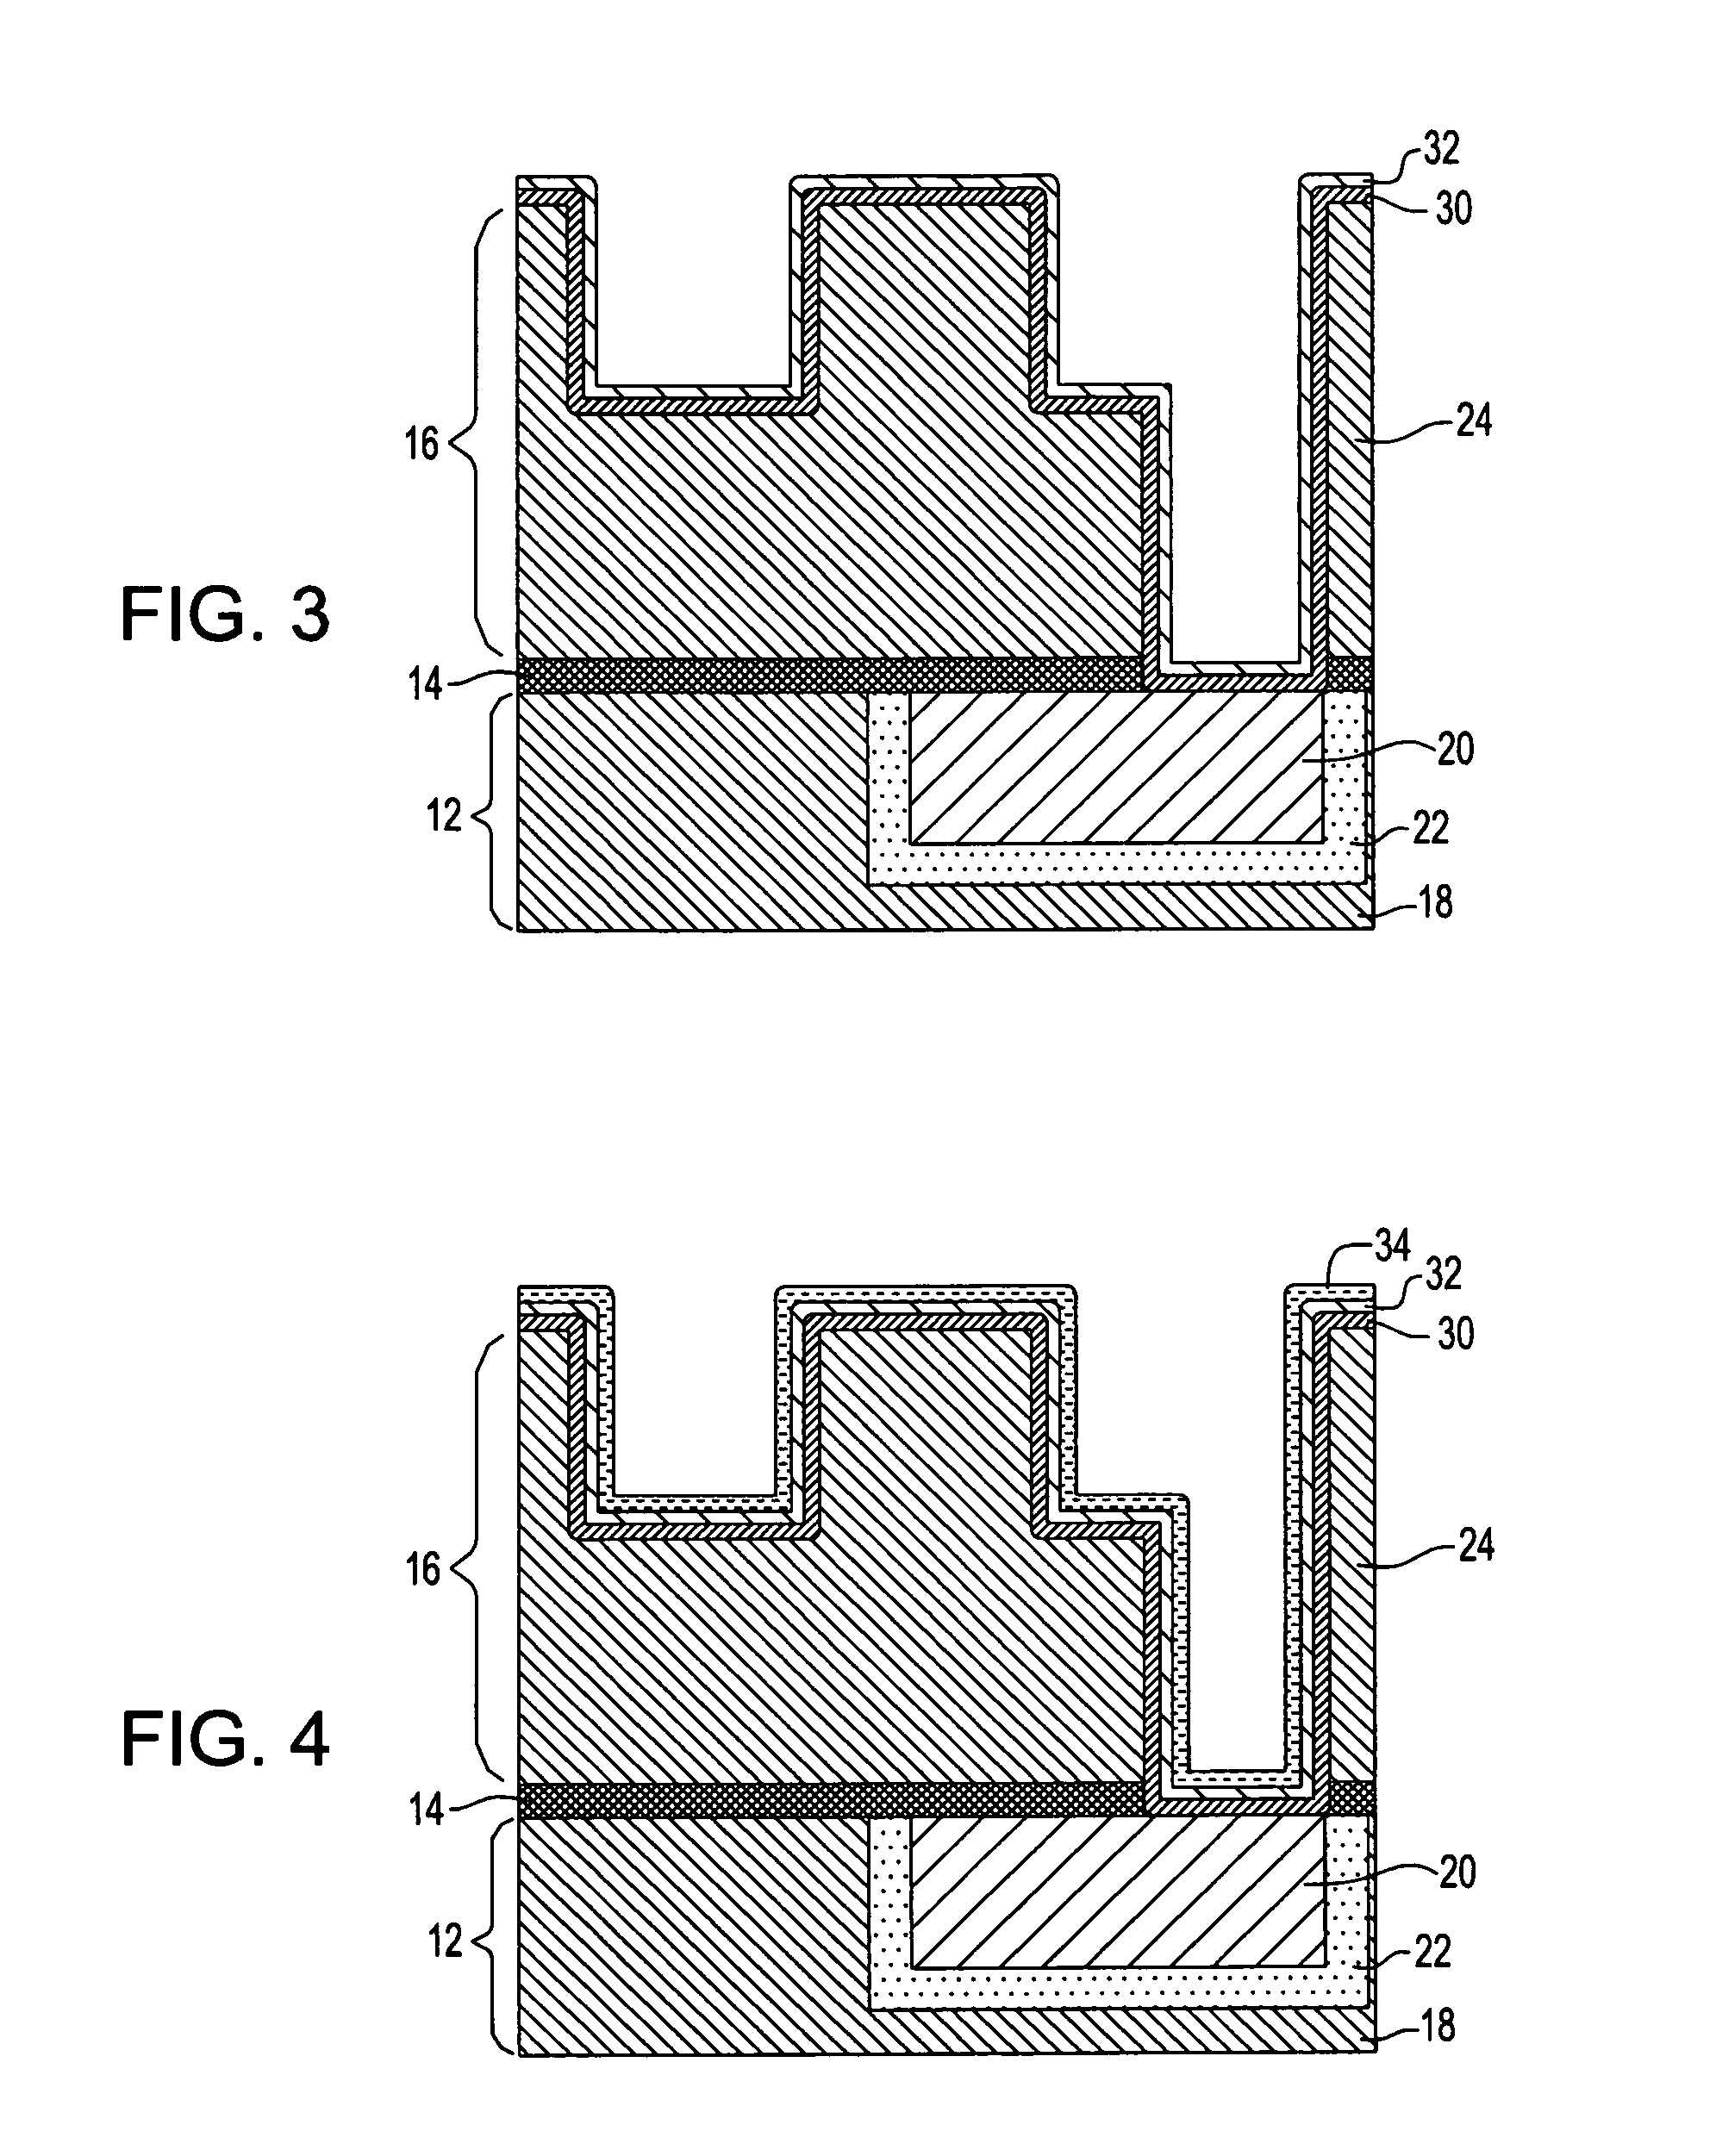 Grain growth promotion layer for semiconductor interconnect structures